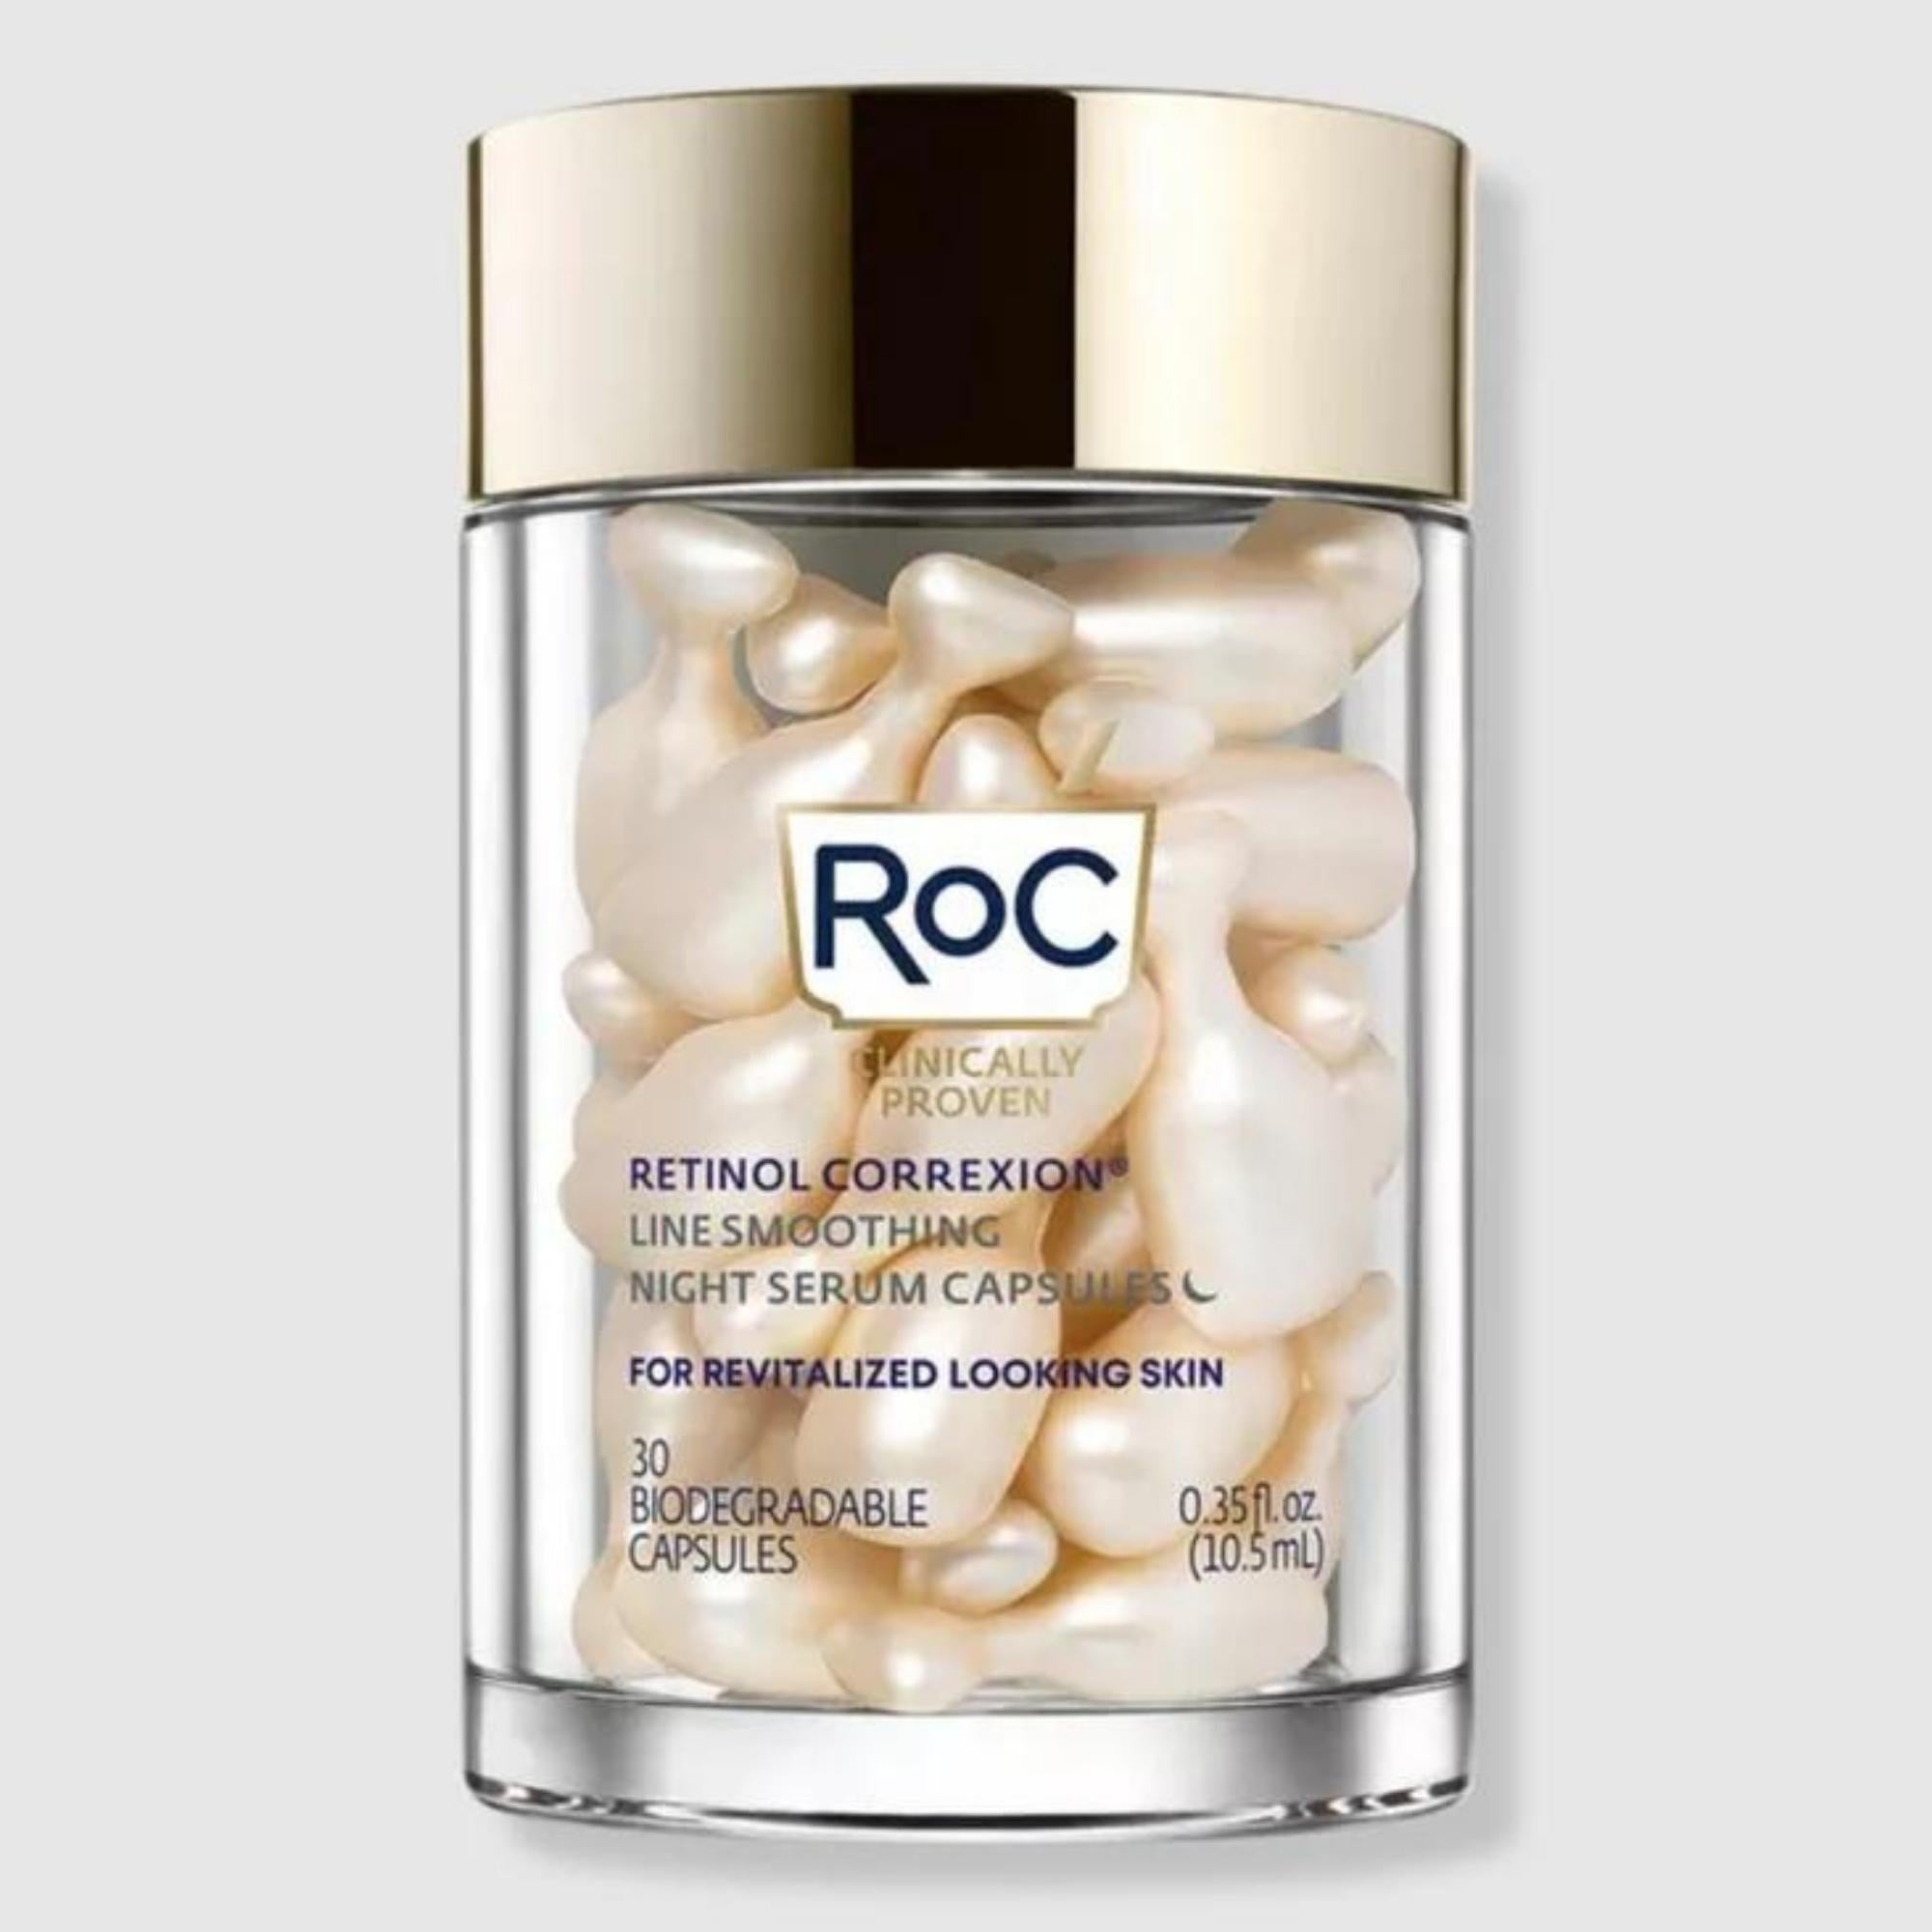 RoC Retinol Correxion Anti-Aging Wrinkle Night Serum, Daily Line Smoothing Skin Care Treatment for Fine Lines, Dark Spots, Post-Acne Scars, 30 Individual Capsules, Unscented, 0.35 Fl Oz